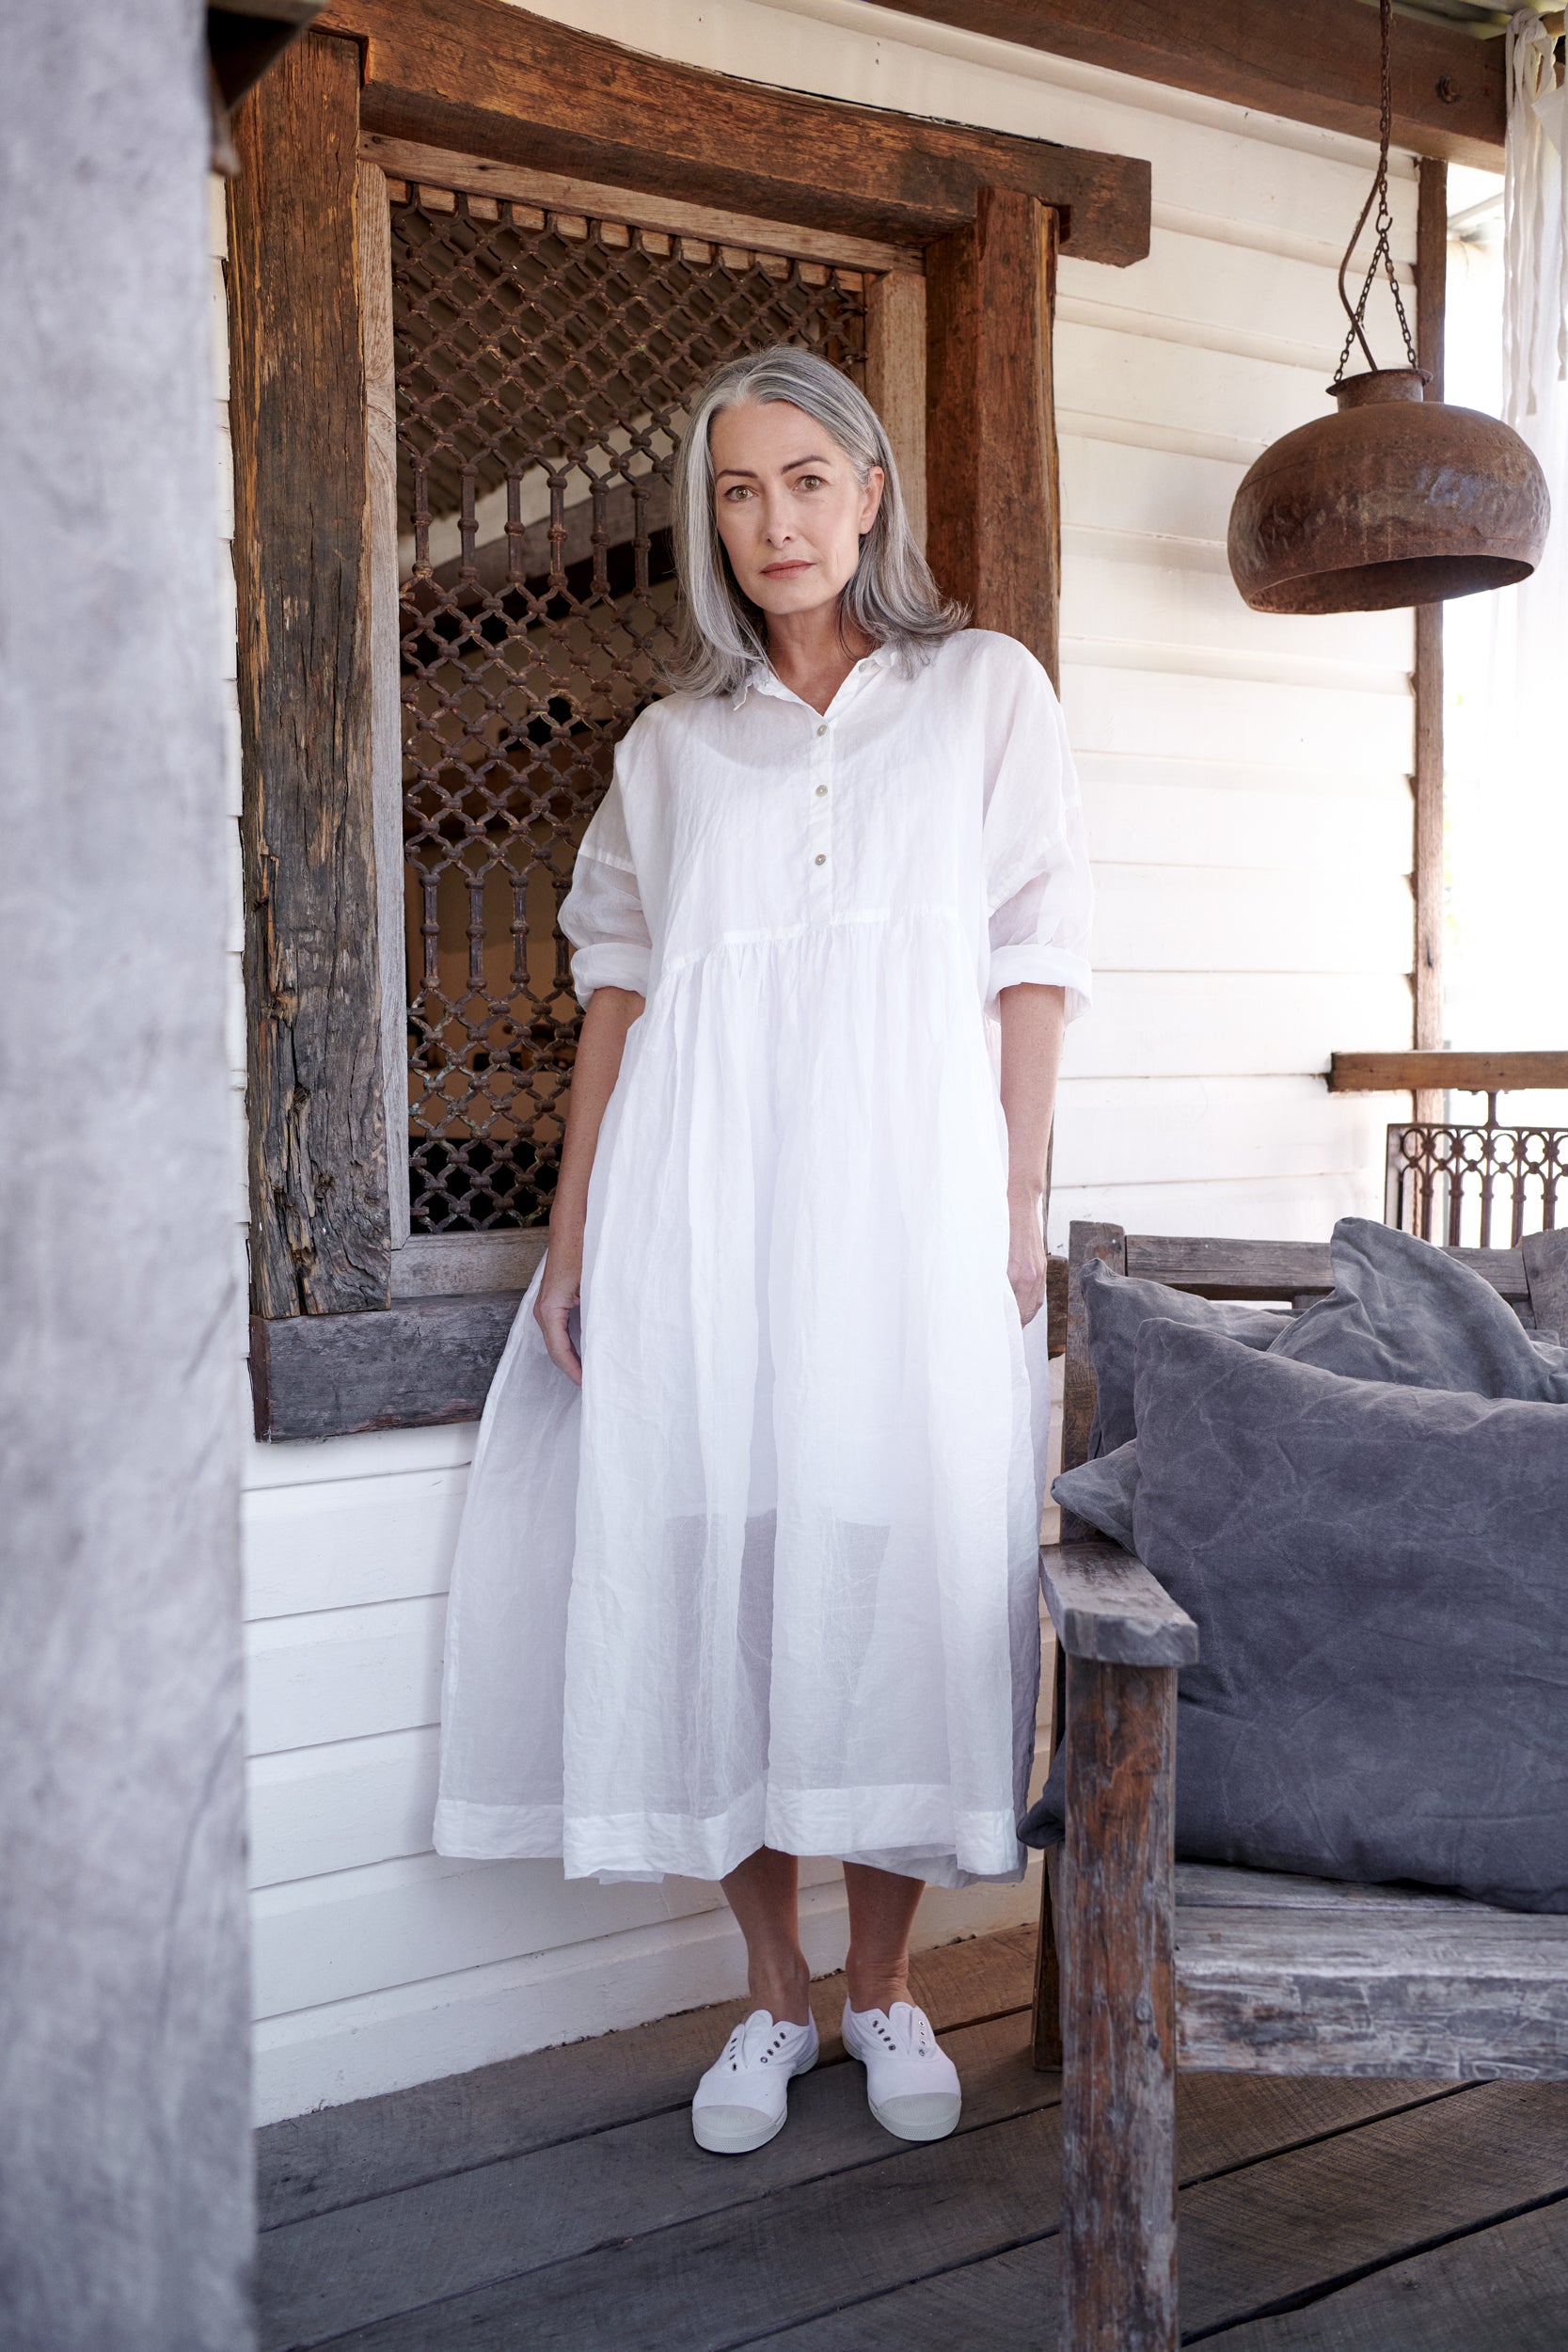 A MegbyDesign model is wearing a long white cotton dress with a collared neck and rolled sleeves